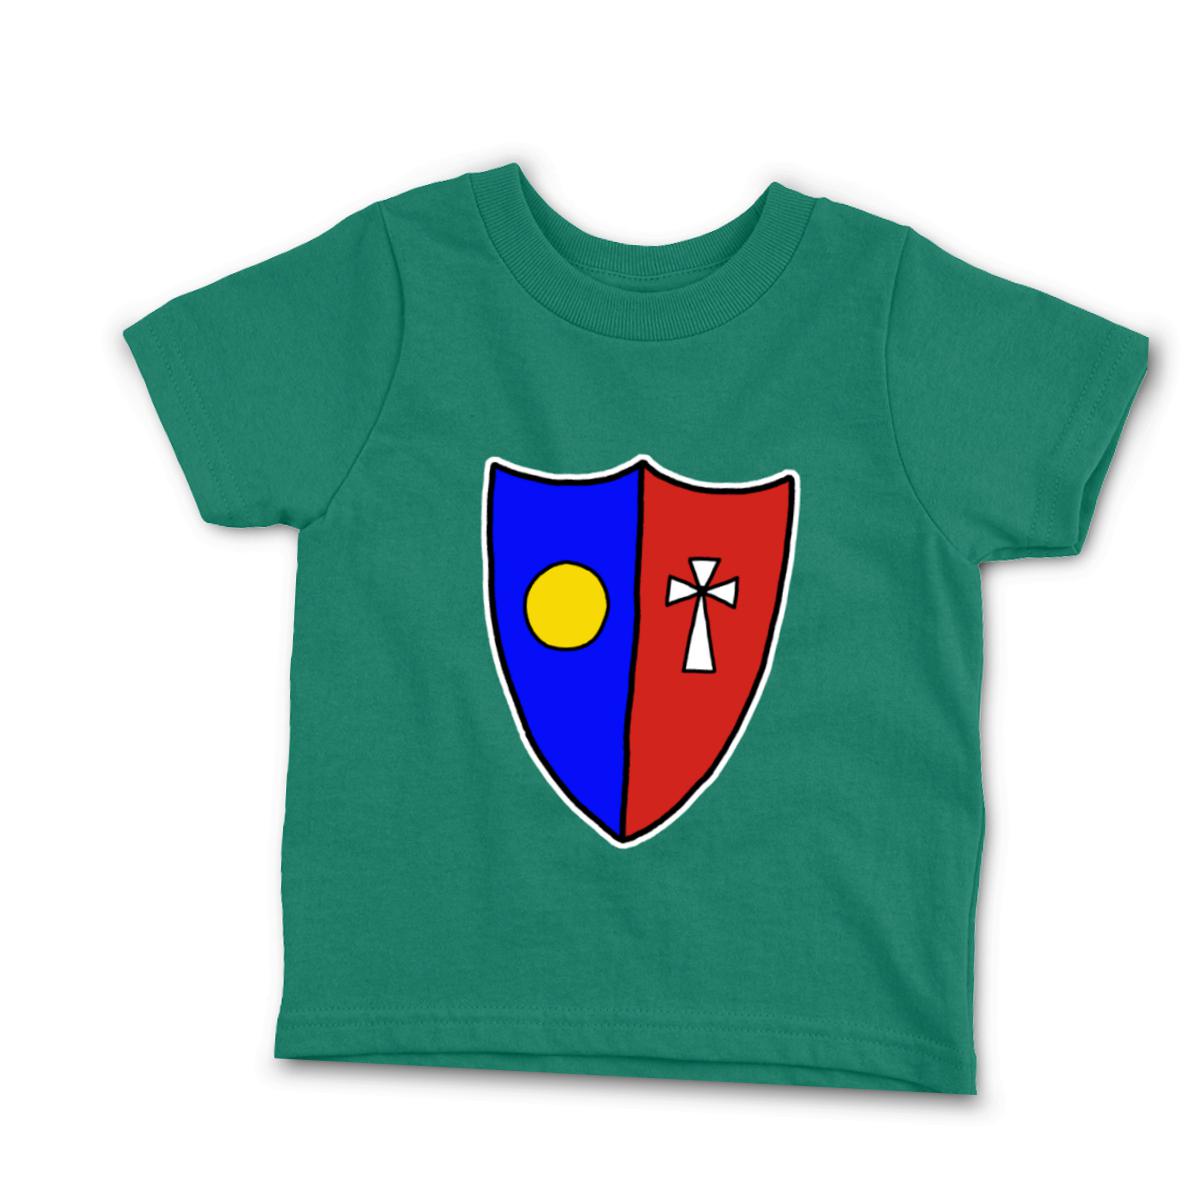 Shield Toddler Tee 2T kelly